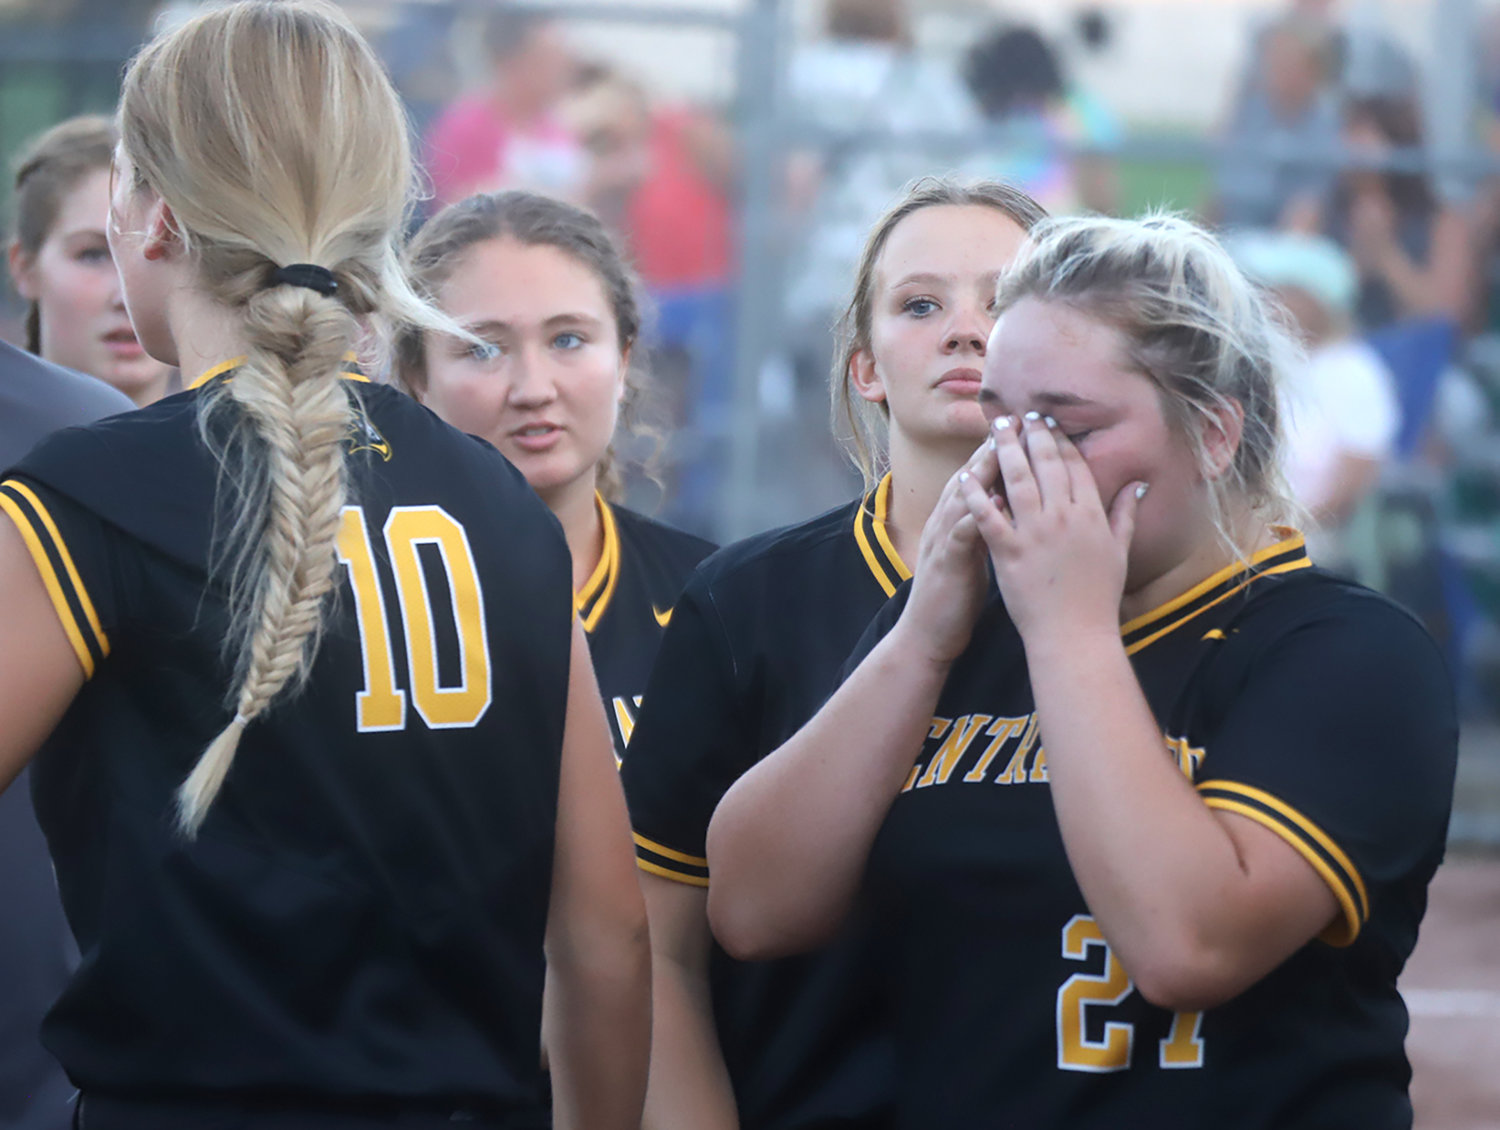 Sophie Turner (27) wipes away tears after congratulating the West Burlington/Notre Dame Falcons on the Region 8 semifinal win Saturday in West Burlington.